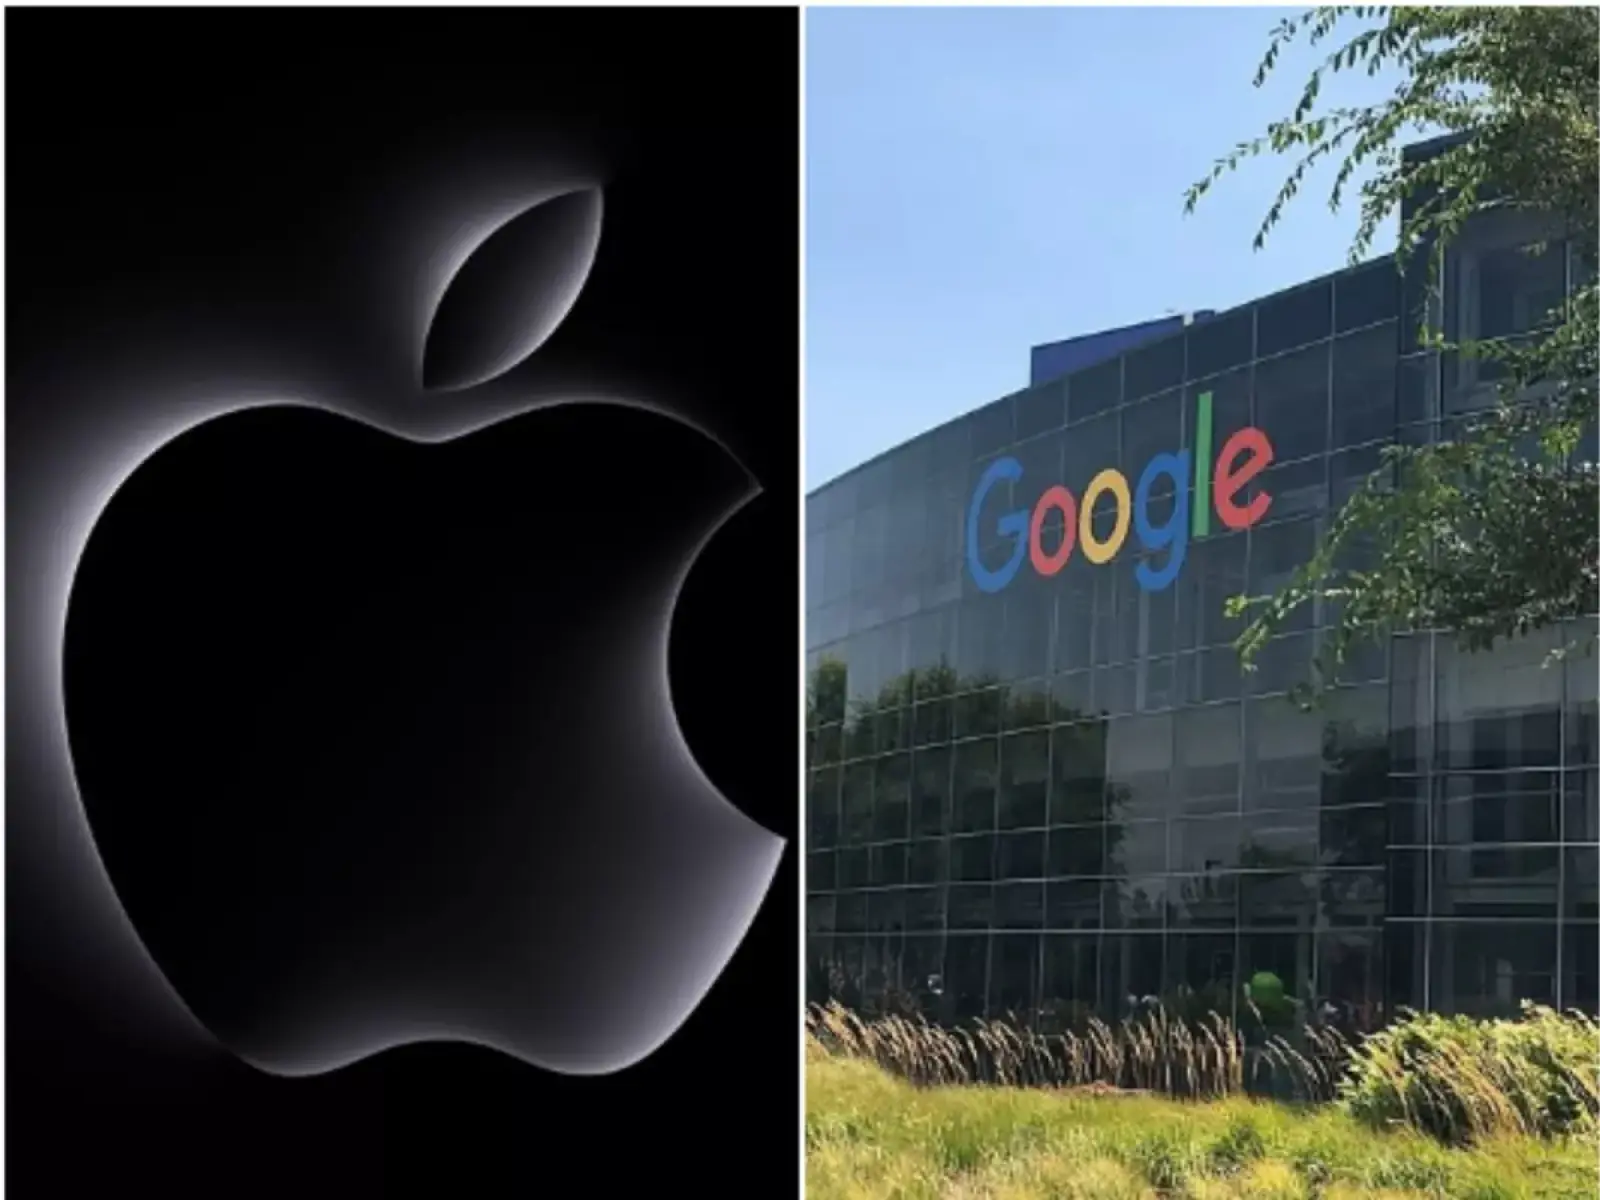 Google gave Rs 1.7 lakh crore to Apple, know what the default search engine deal